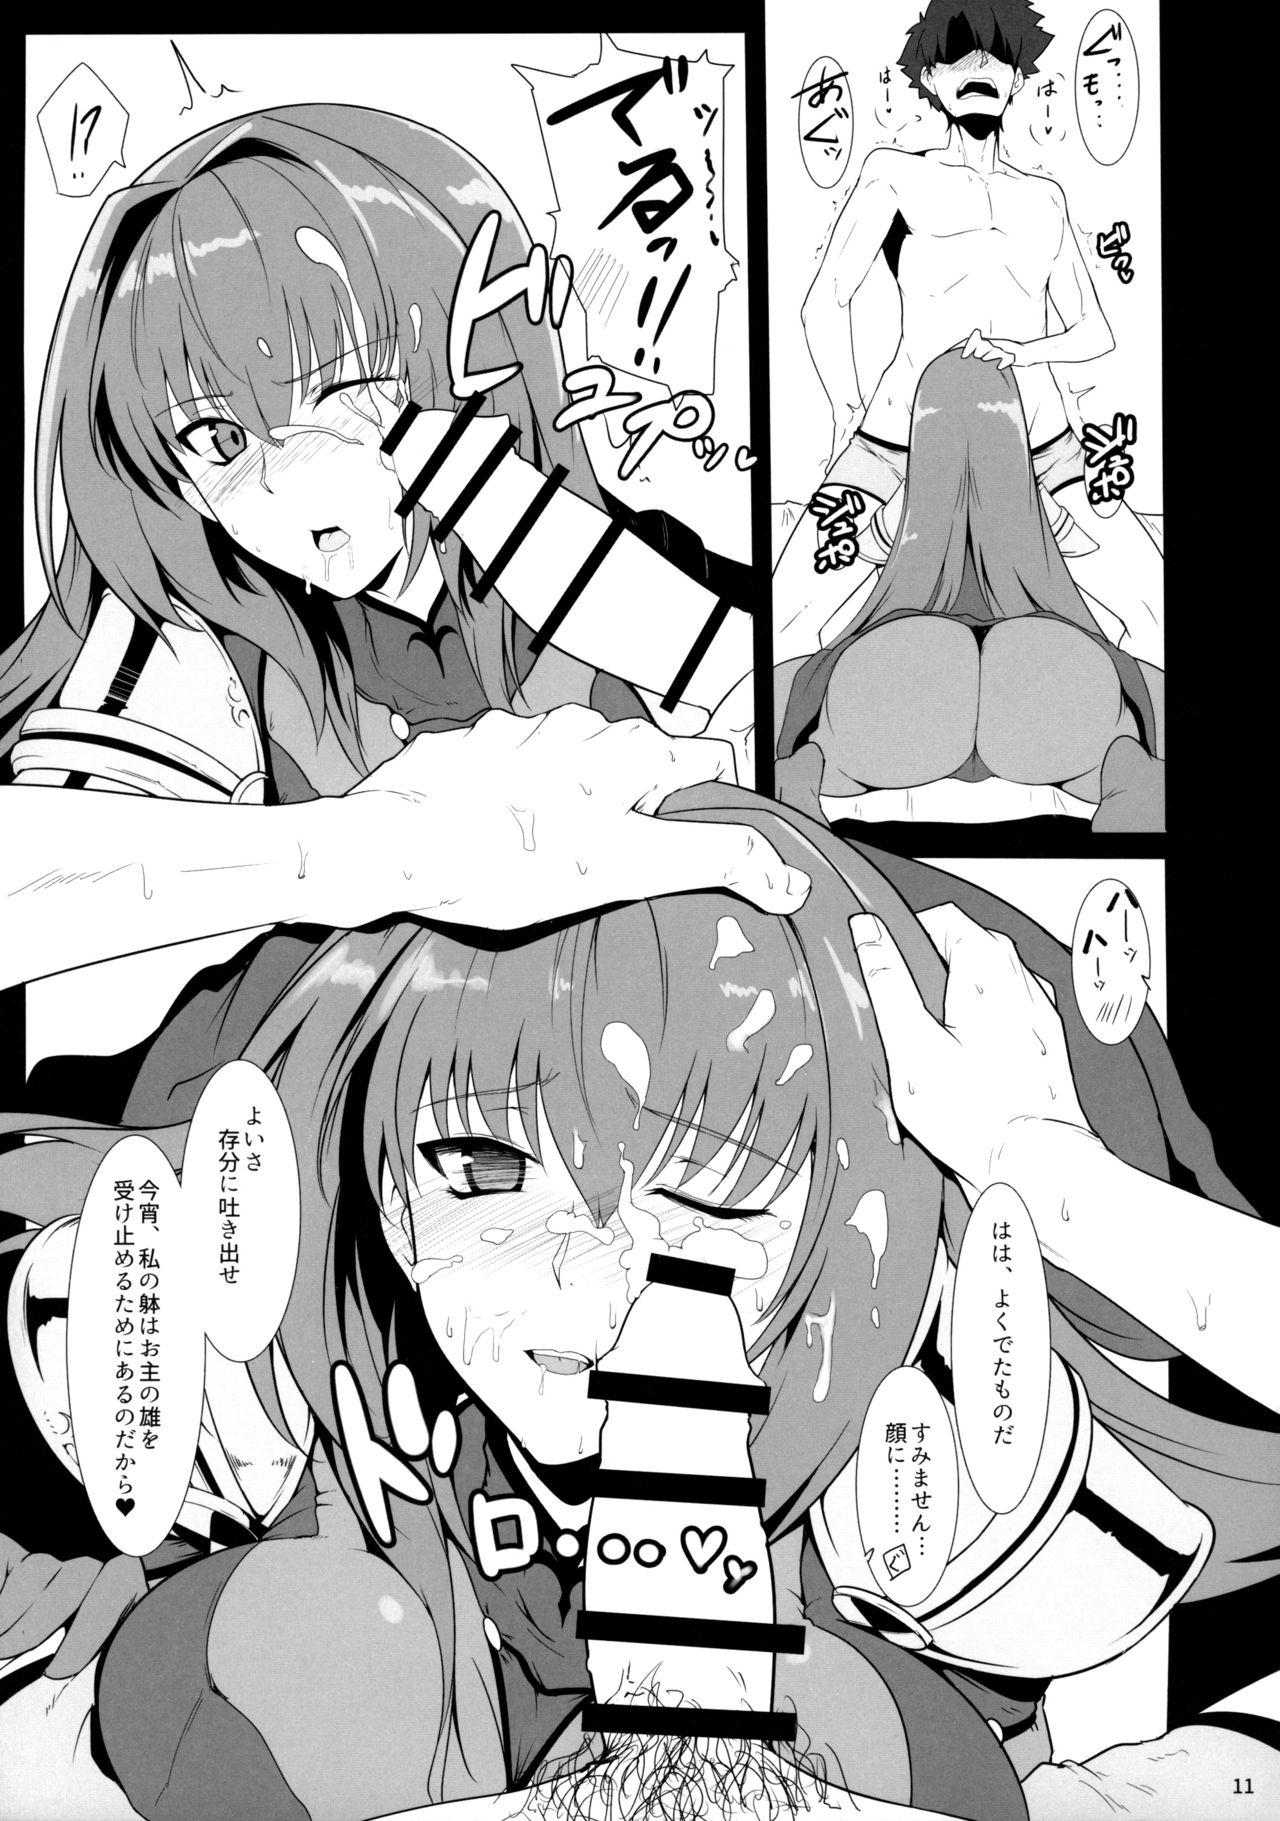 Negao AH! MY MISTRESS! - Fate grand order Gapes Gaping Asshole - Page 11